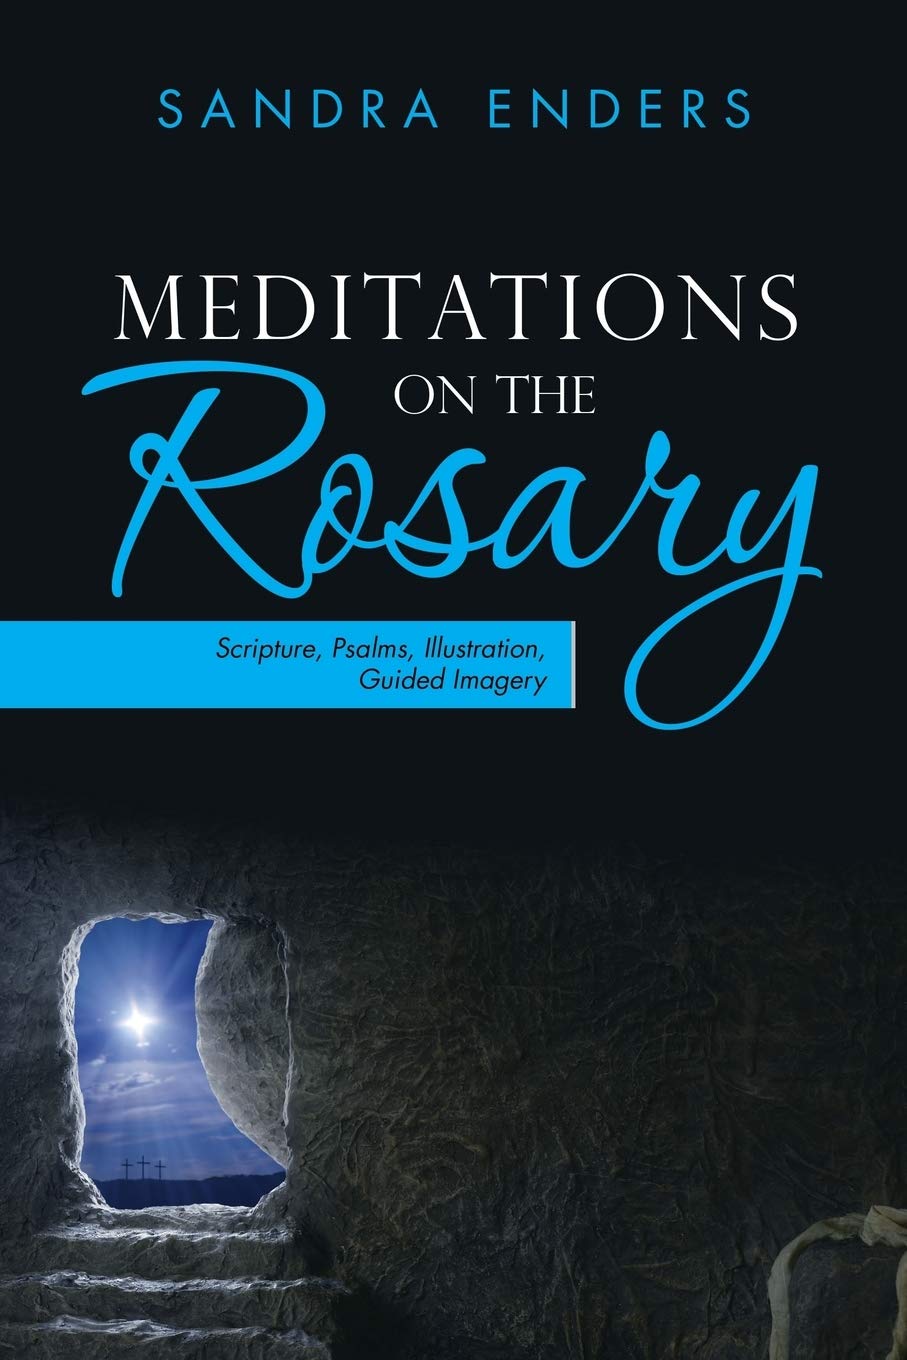 Sandra Enders engages the author's Tranquility Press to promote meditations on the Rosary